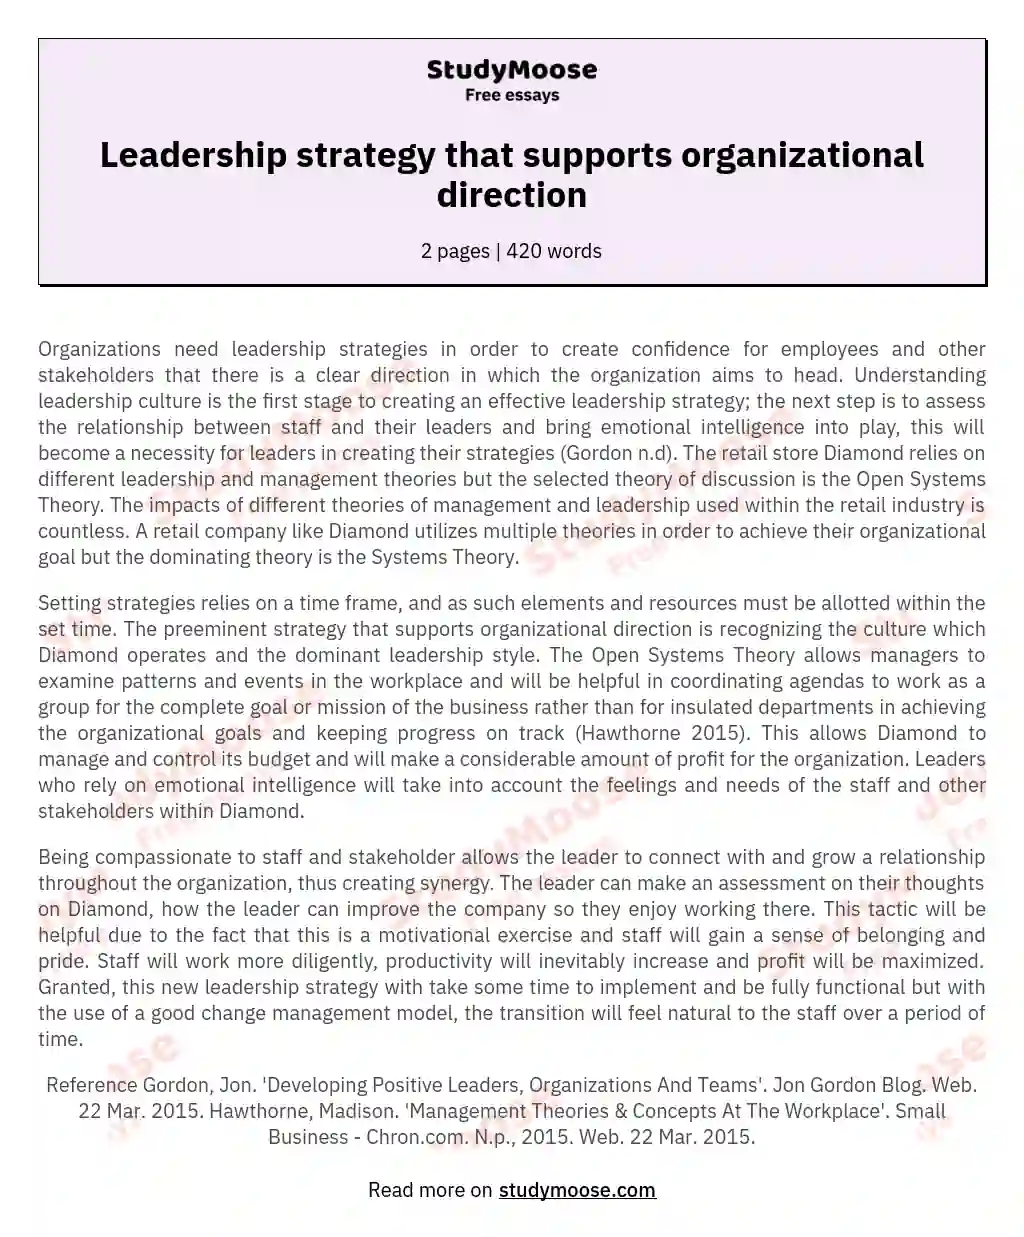 Leadership strategy that supports organizational direction essay